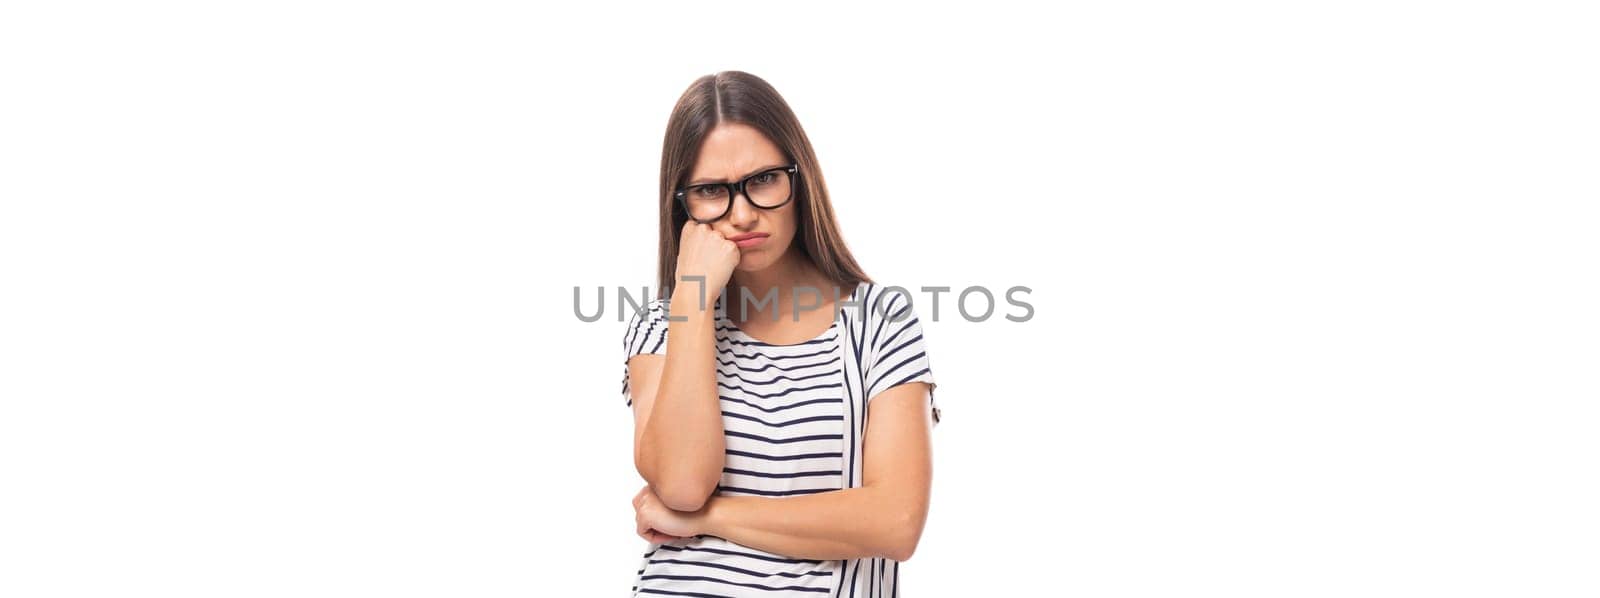 portrait of a young cute casual european woman with long dark hair dressed in a striped t-shirt on a white background with copy space by TRMK